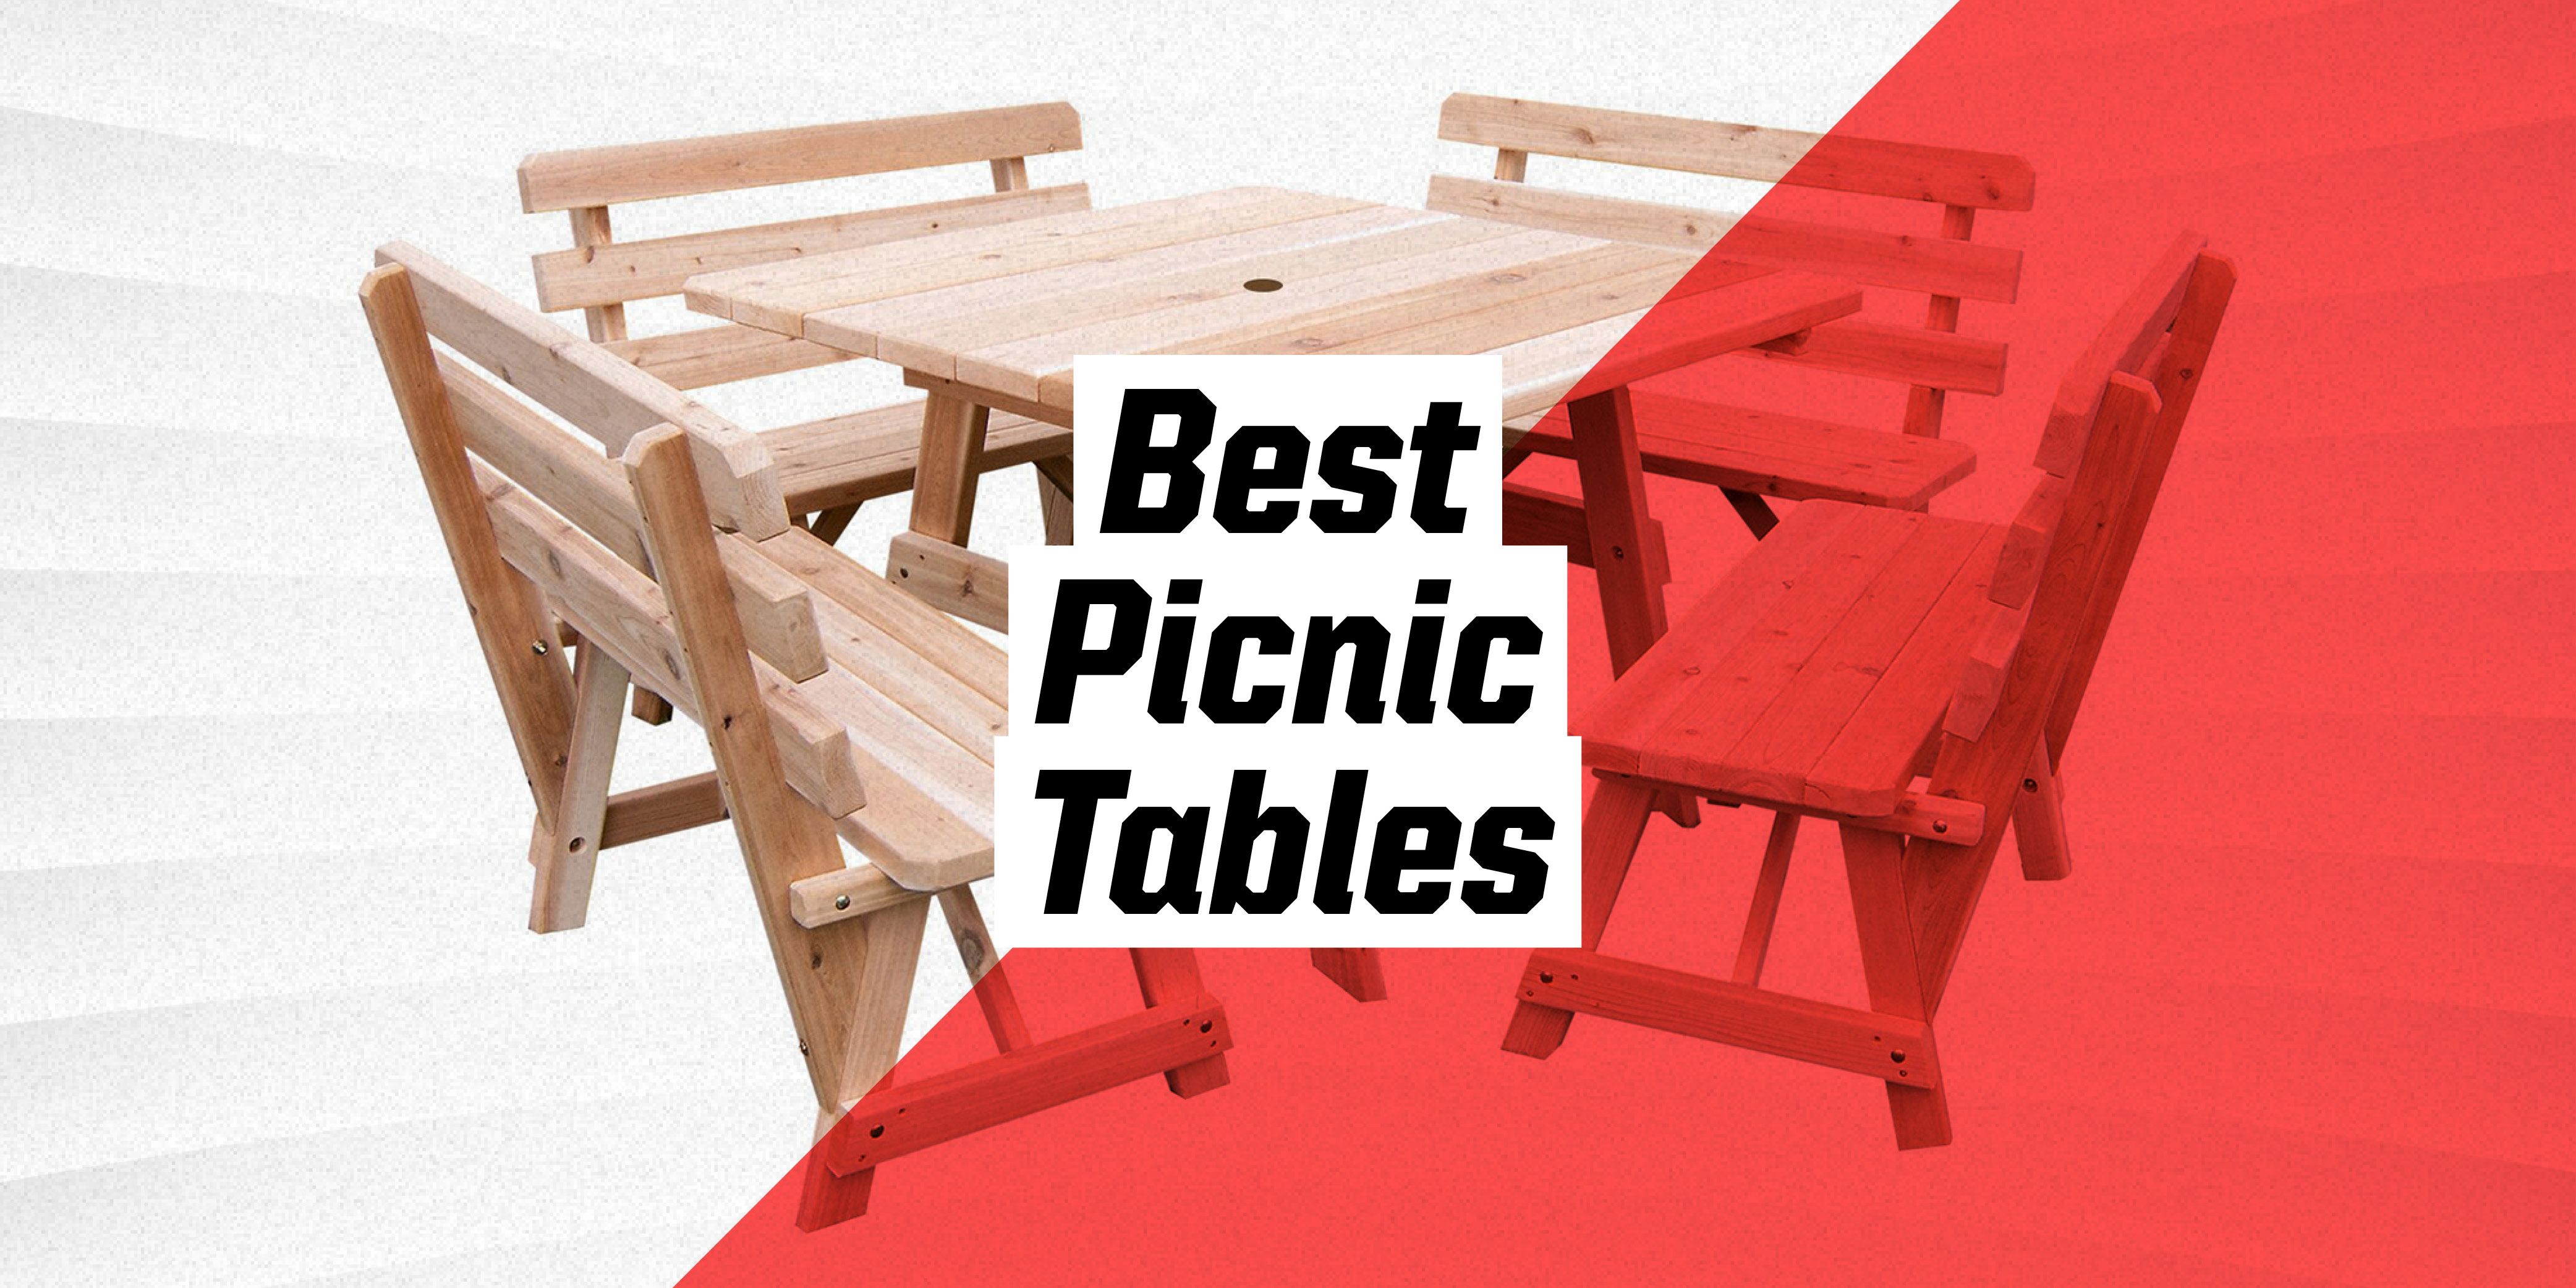 8 Best Picnic Tables For Summer 2021